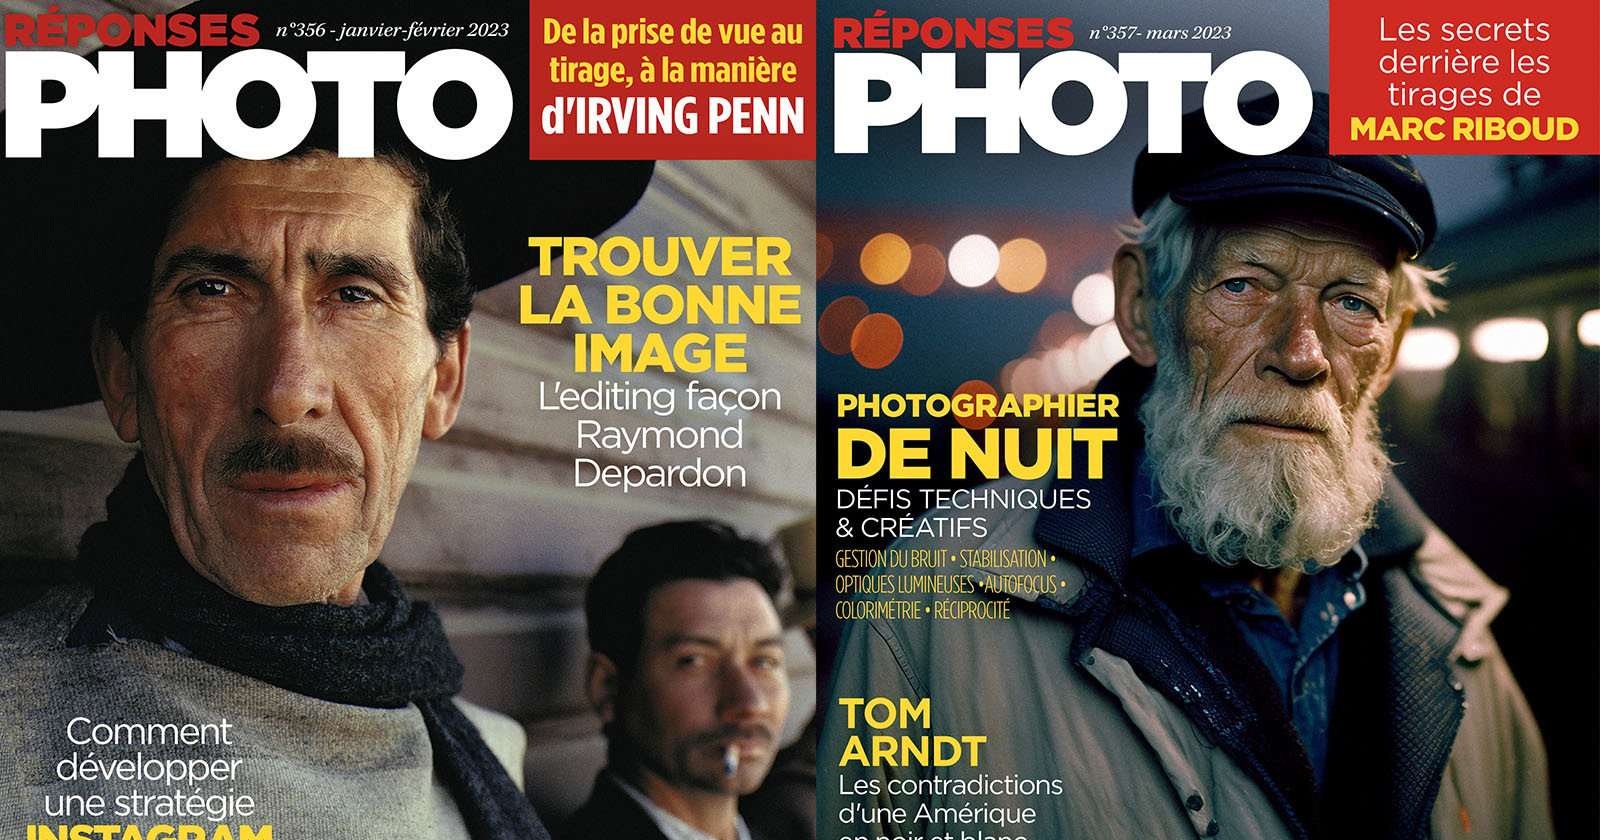  can tell which magazine cover generated photo 